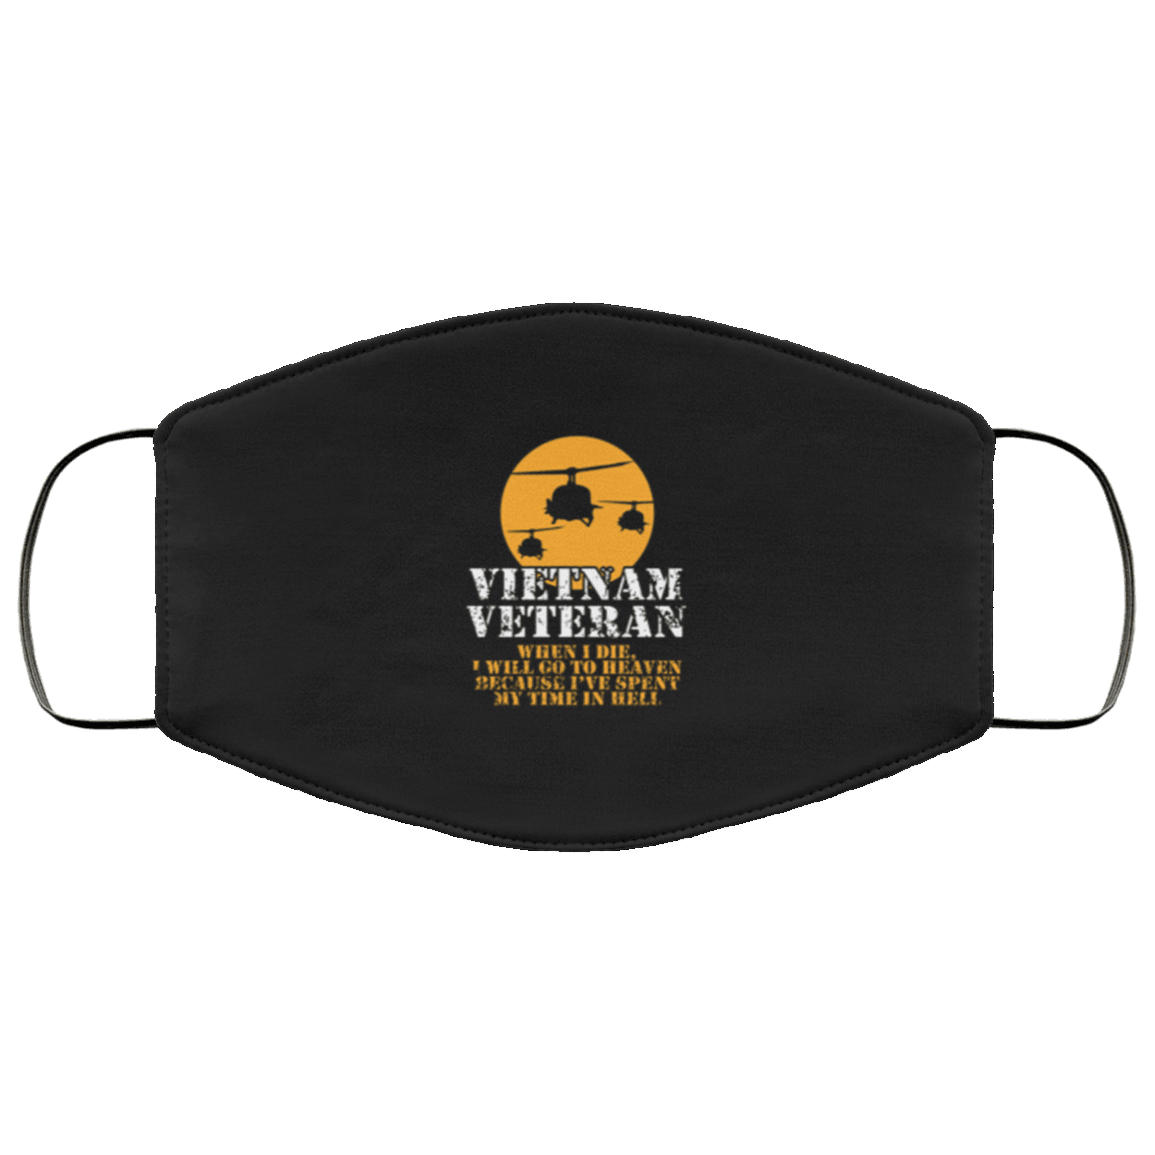 Designs by MyUtopia Shout Out:Vietnam Veteran Adult Fabric Face Mask with Elastic Ear Loops,3 Layer Fabric Face Mask / Black / Adult,Fabric Face Mask